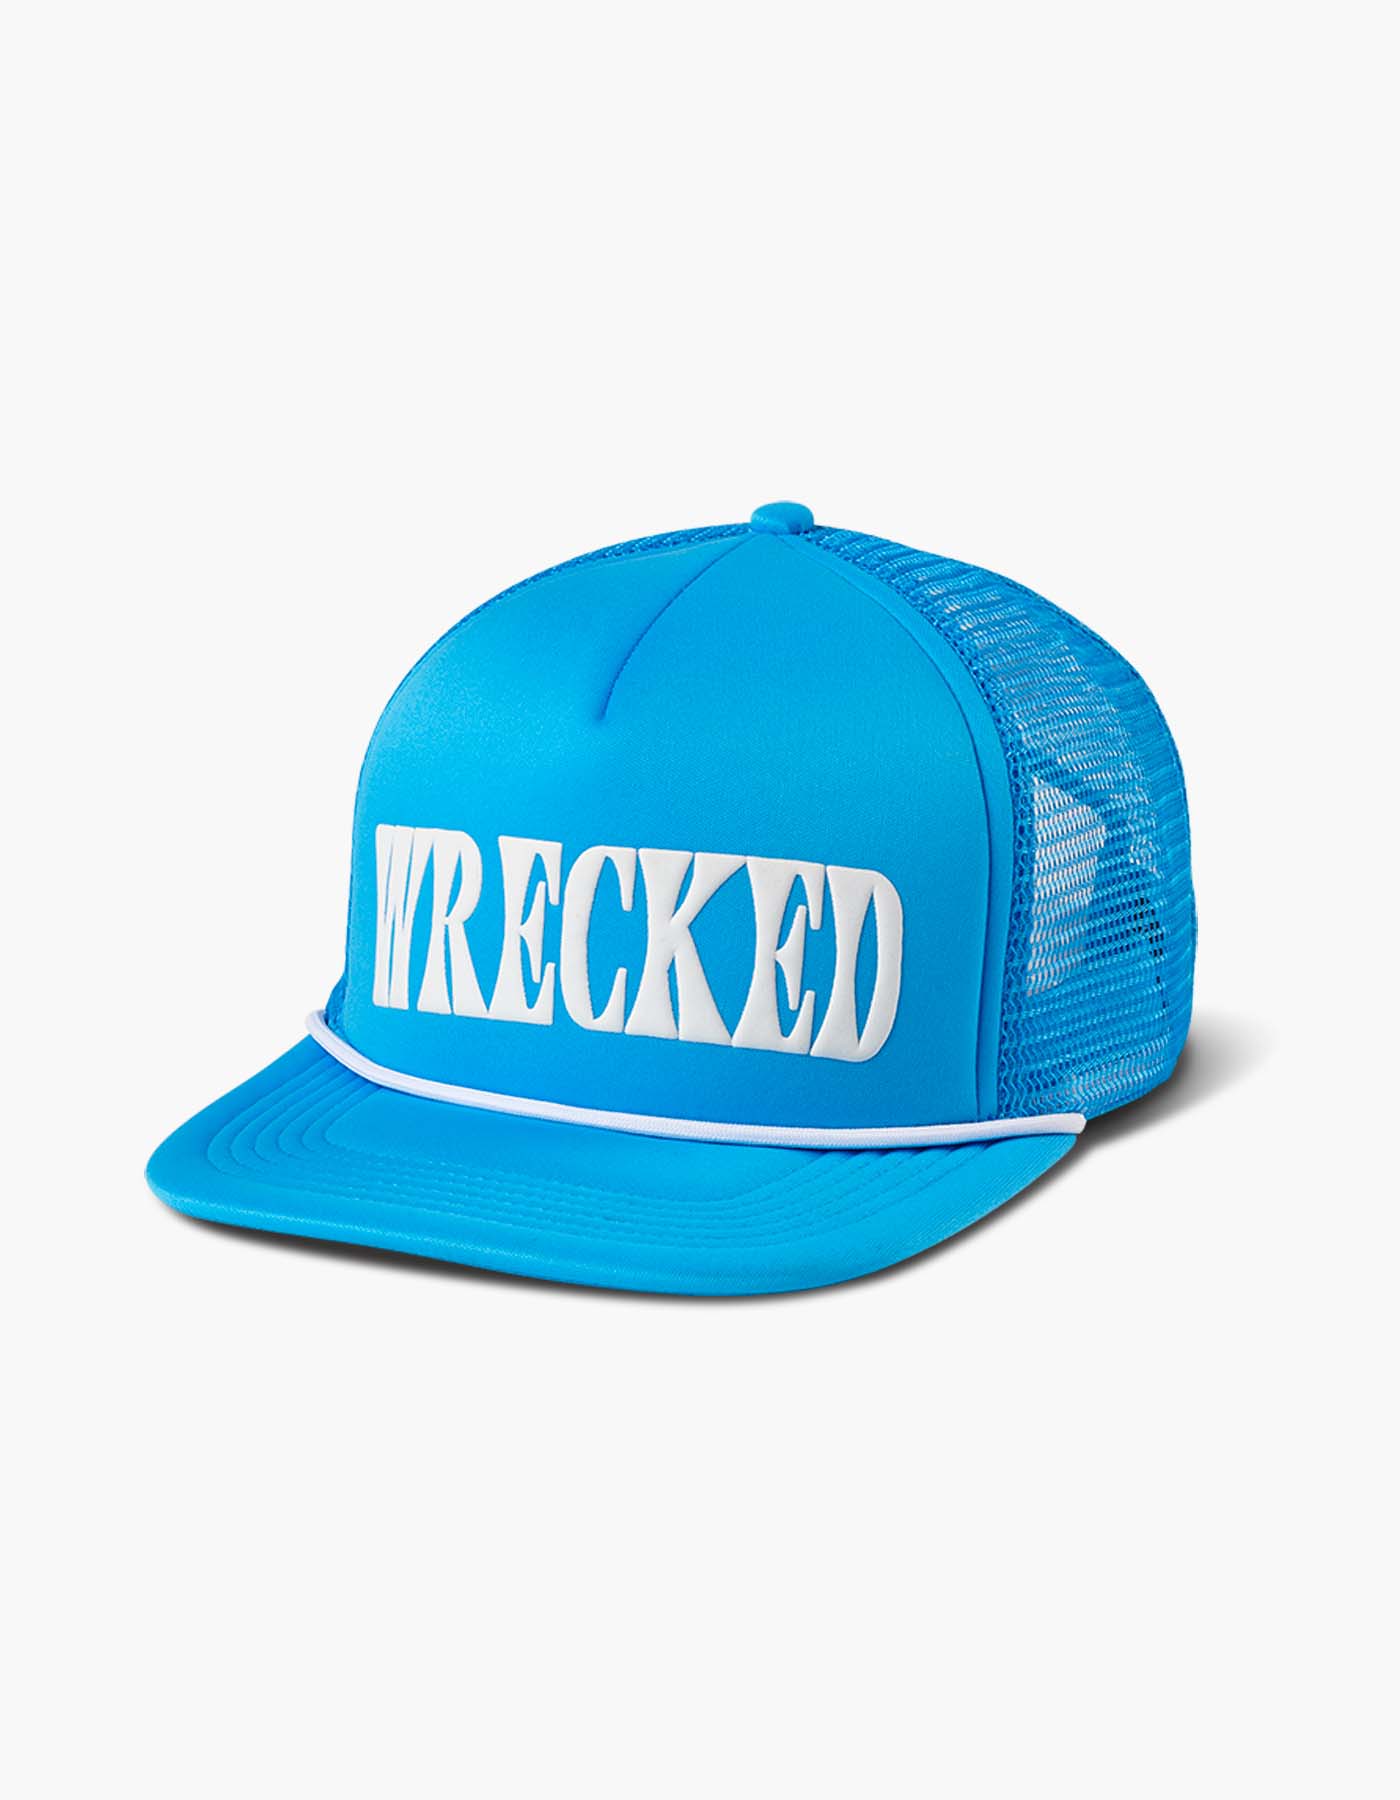 Holy Ship! Wrecked Trucker Hat